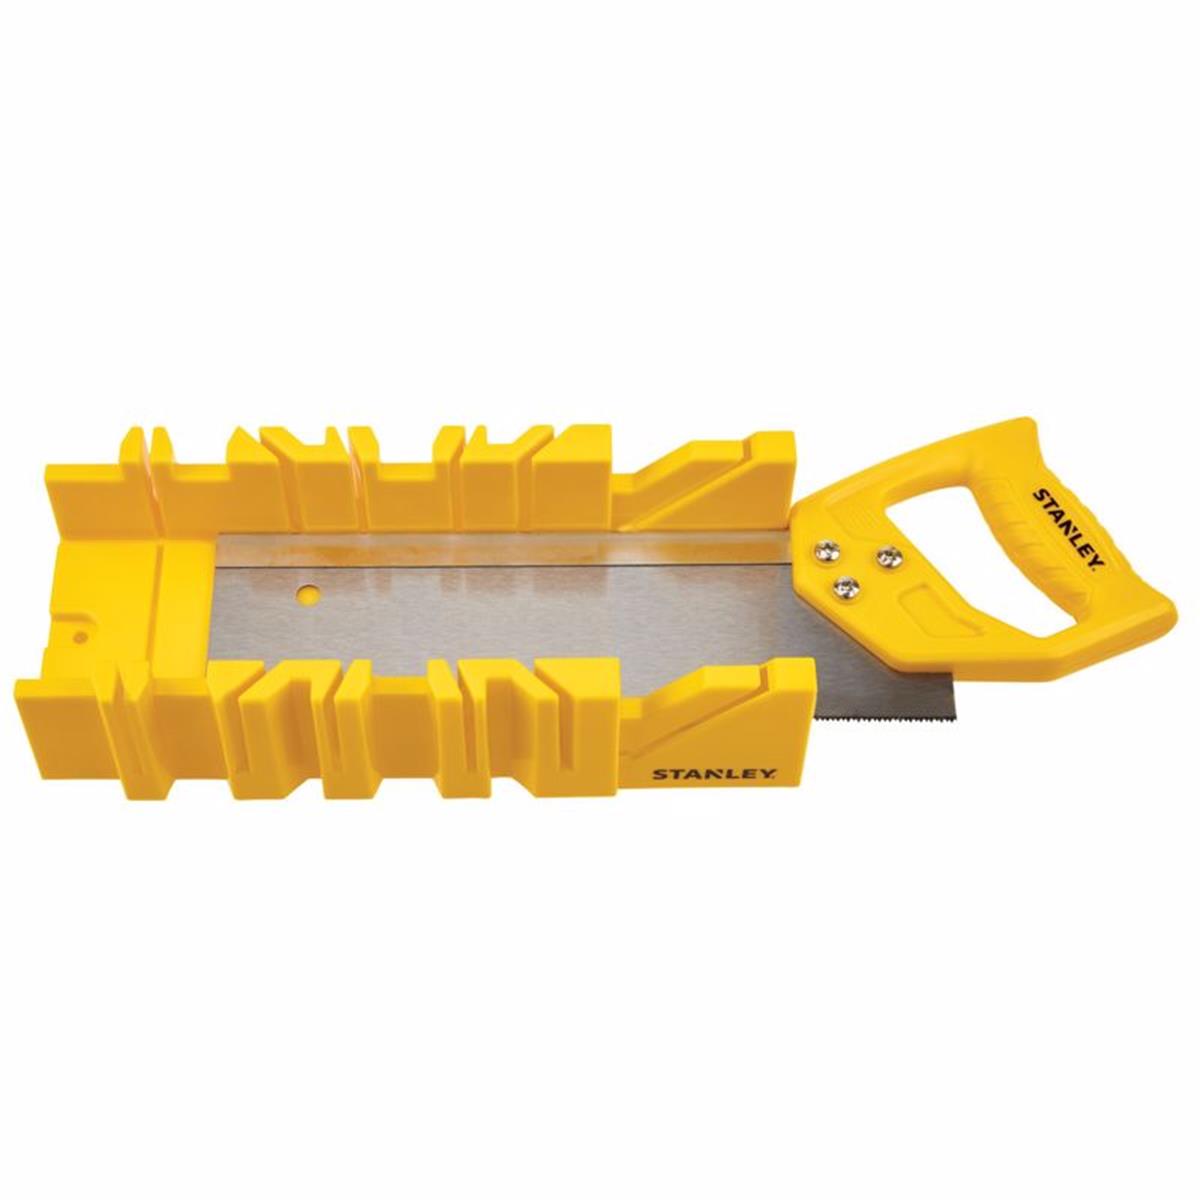 2017141 11 x 3.6 in. Plastic Miter Box with Saw, Yellow -  STANLEY